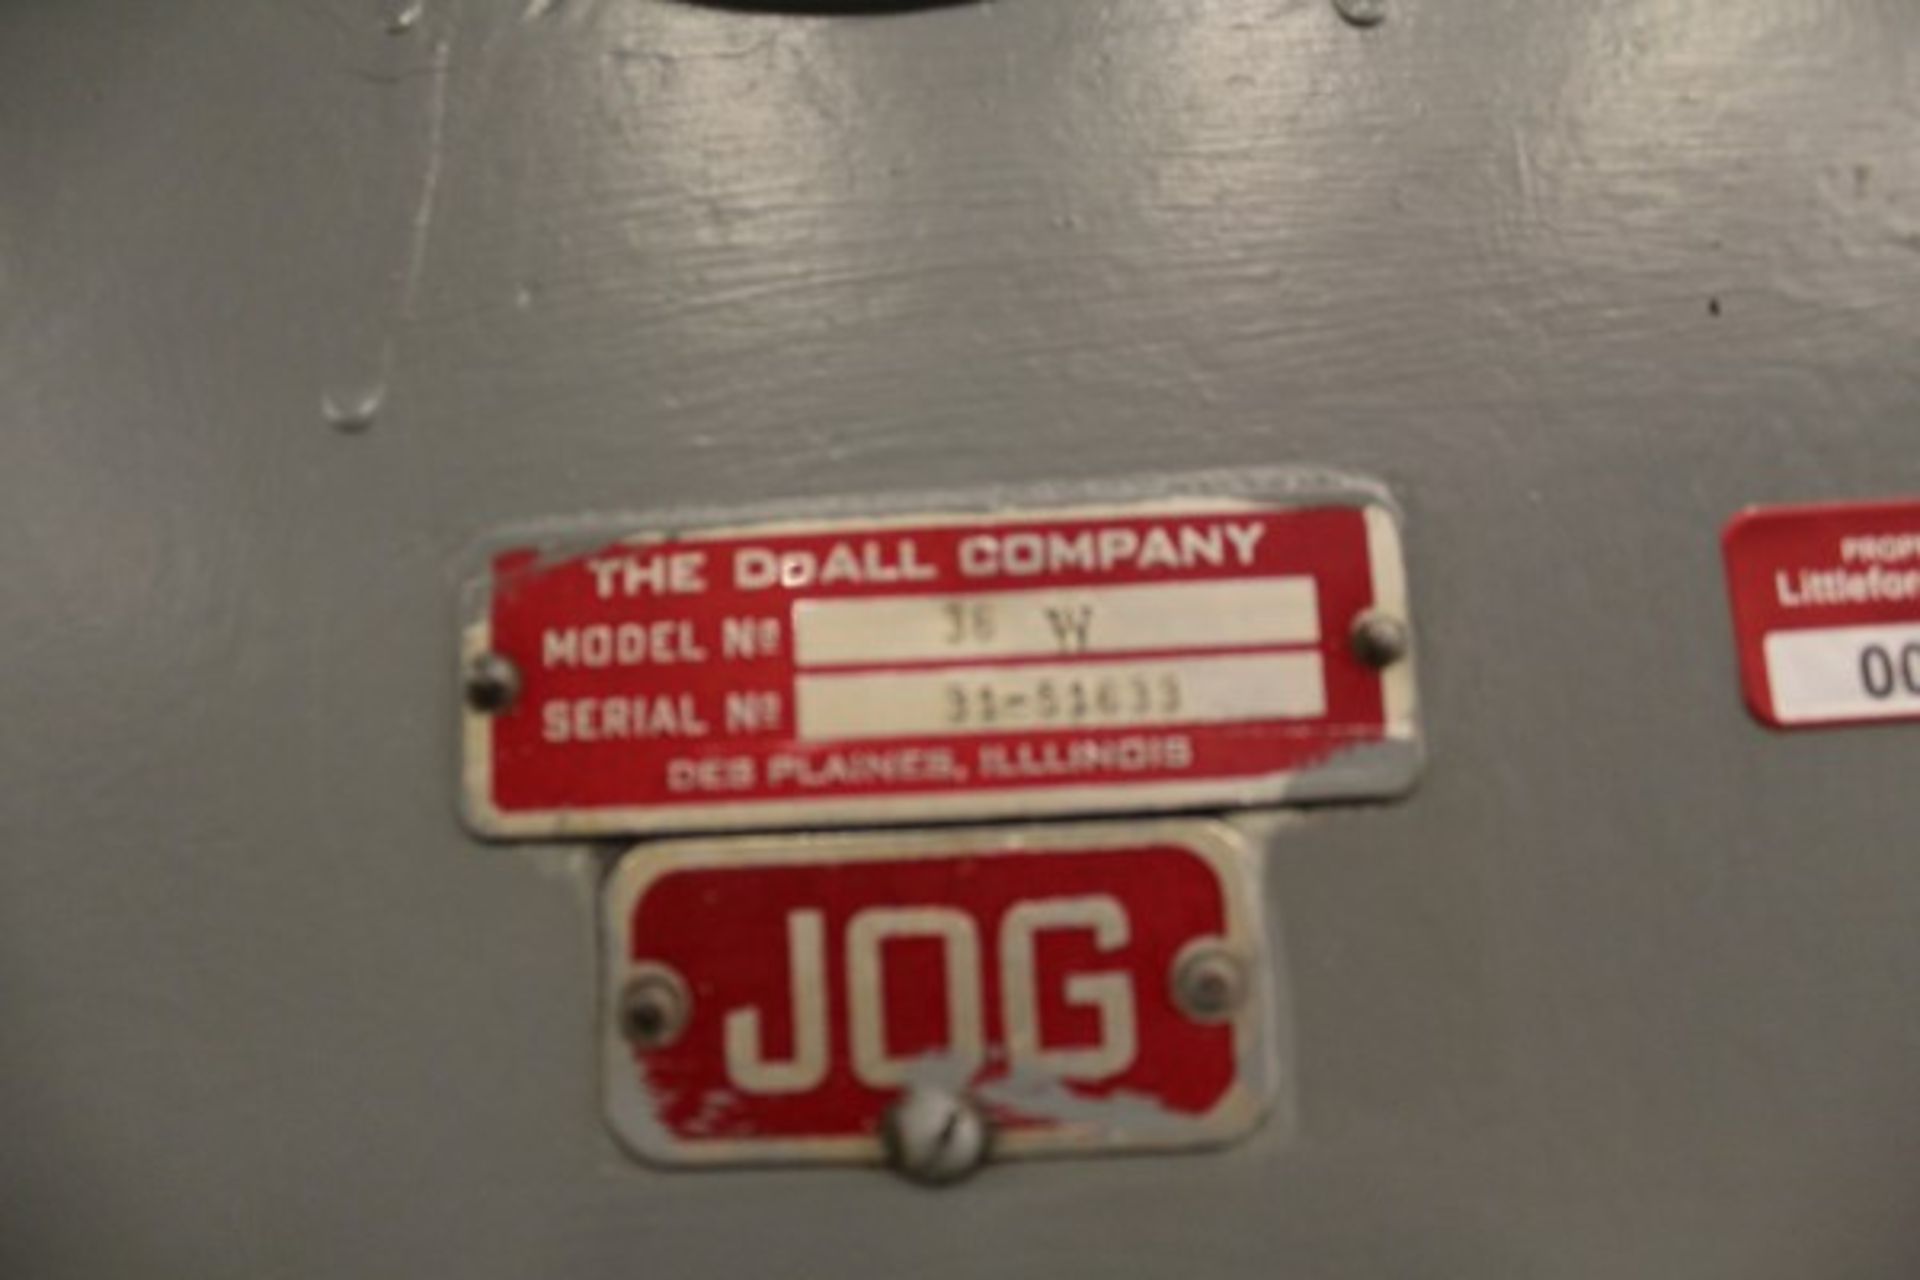 DoAll Vertical Band Saw, M# 36W, S/N 31-51633, Hydraulic Table Feed - Image 2 of 2